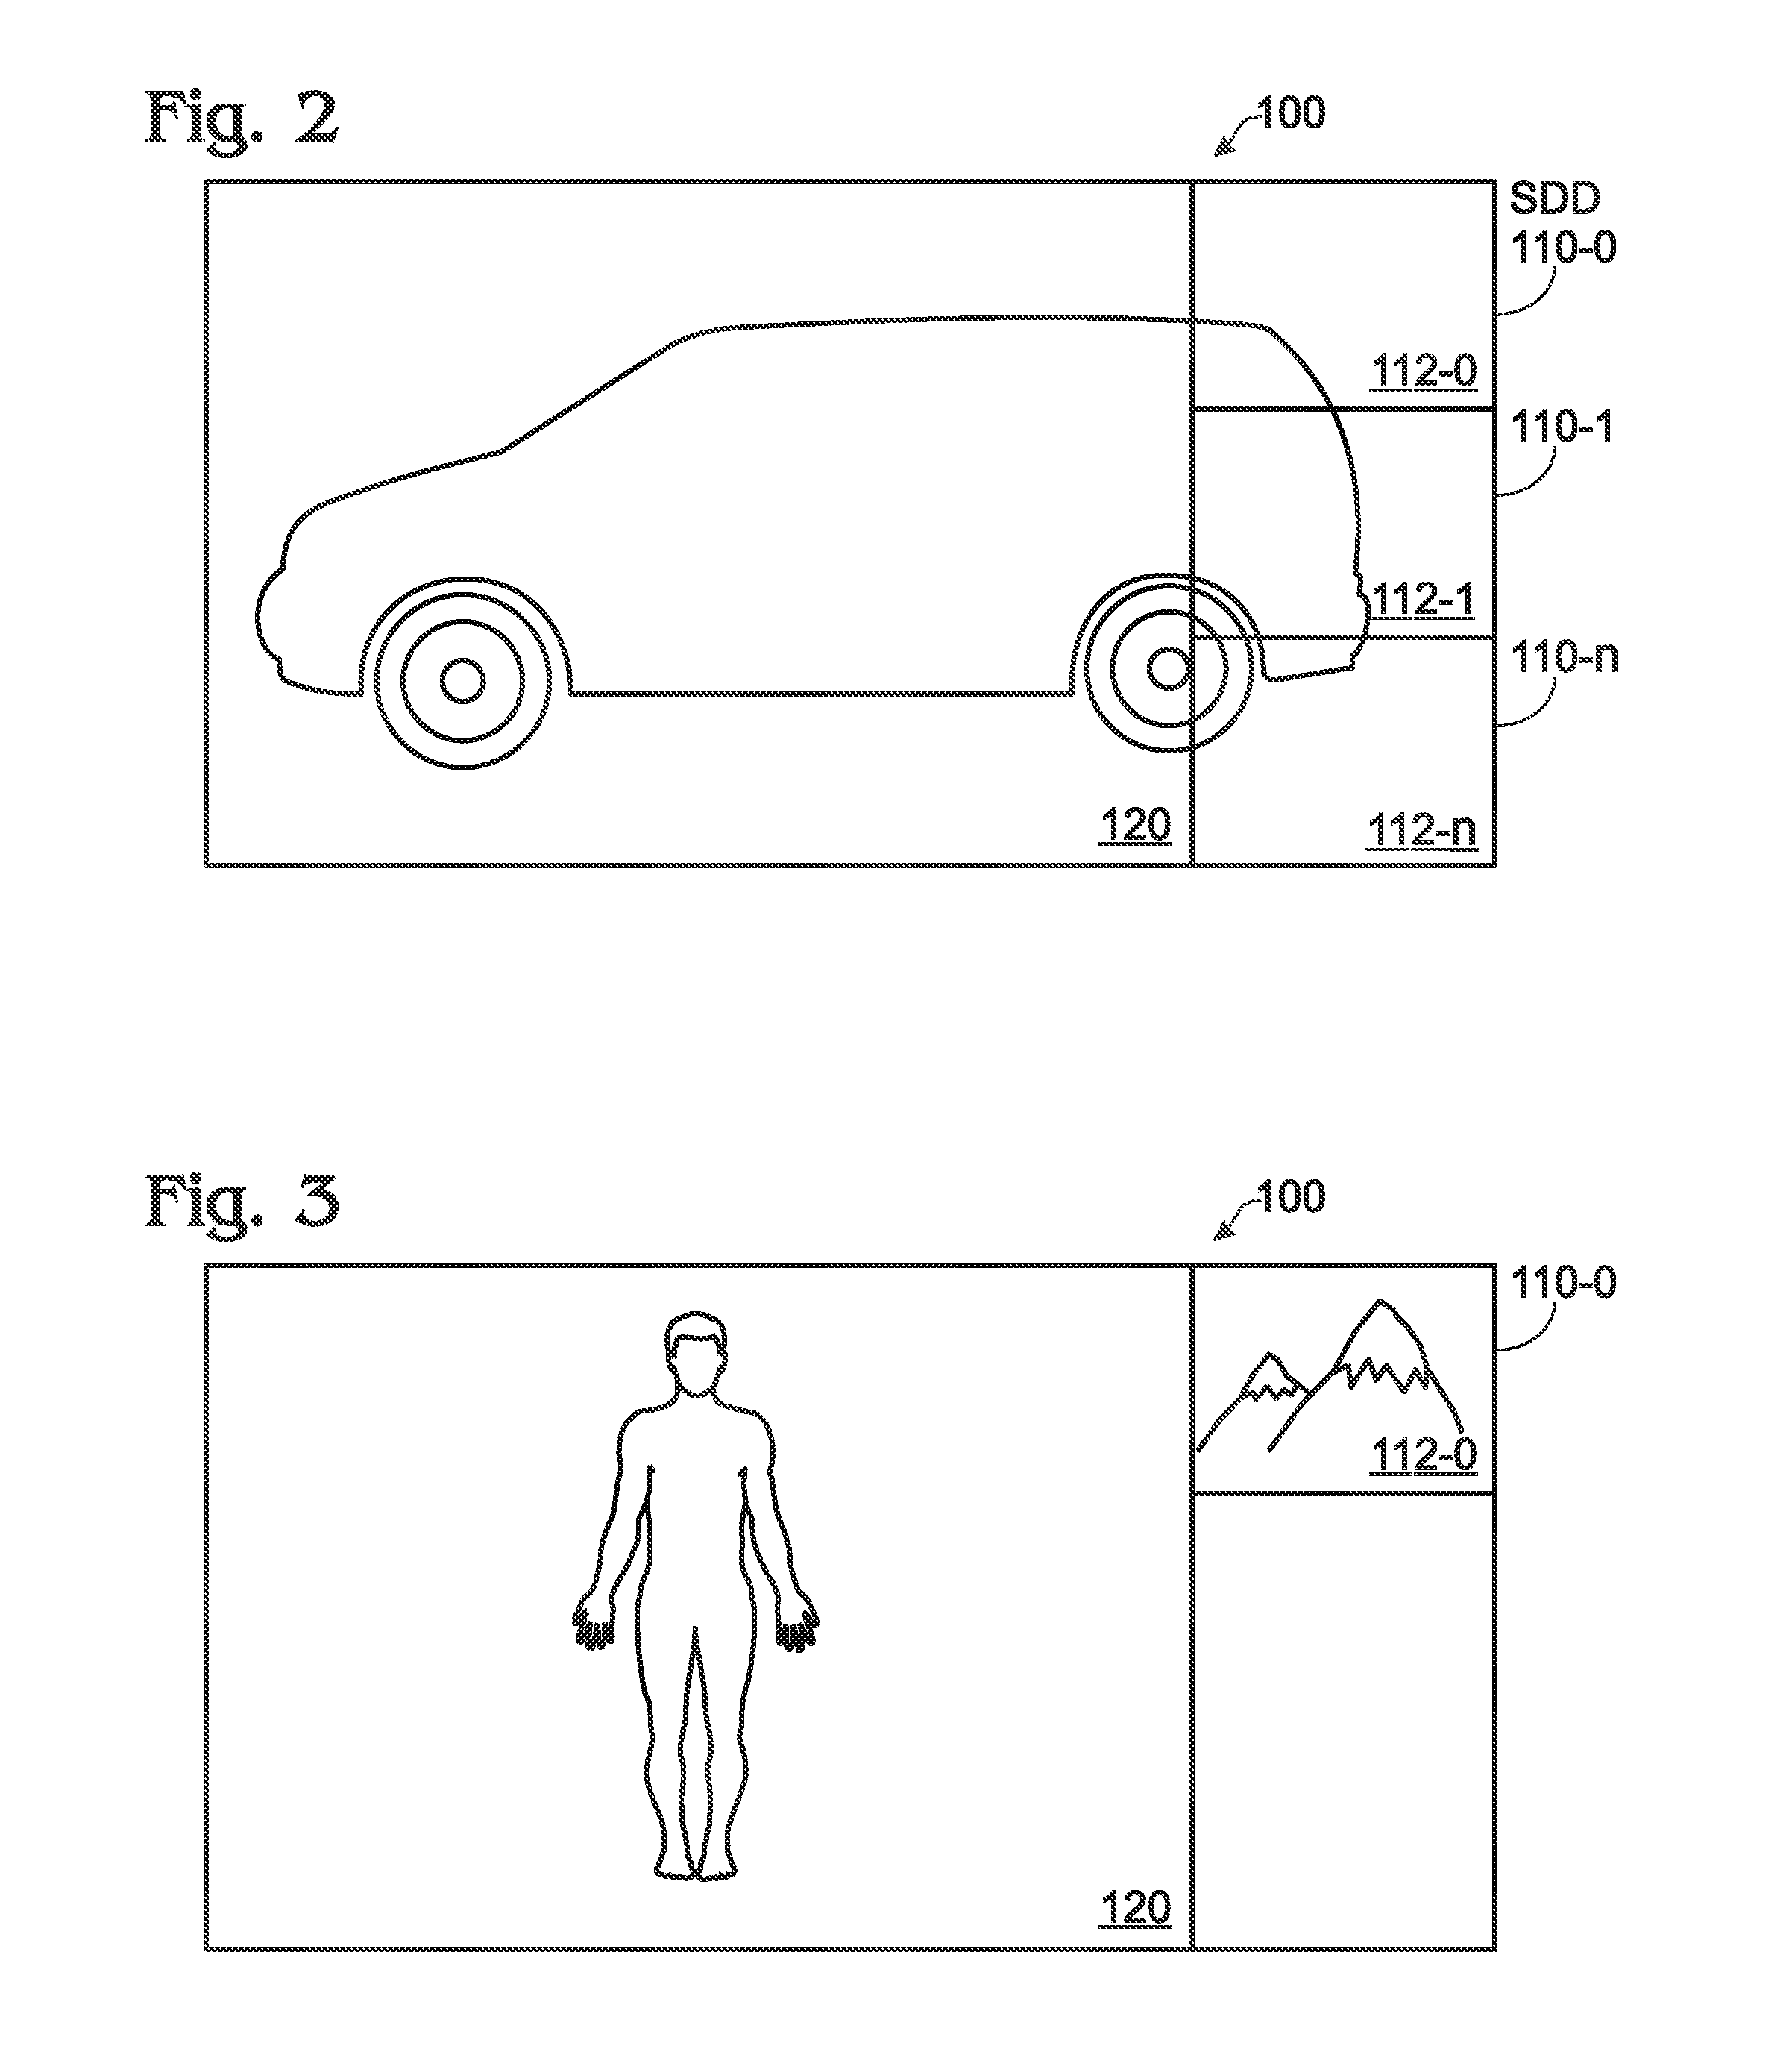 Multi-Function Display with Selectively Autonomous Secondary Modules